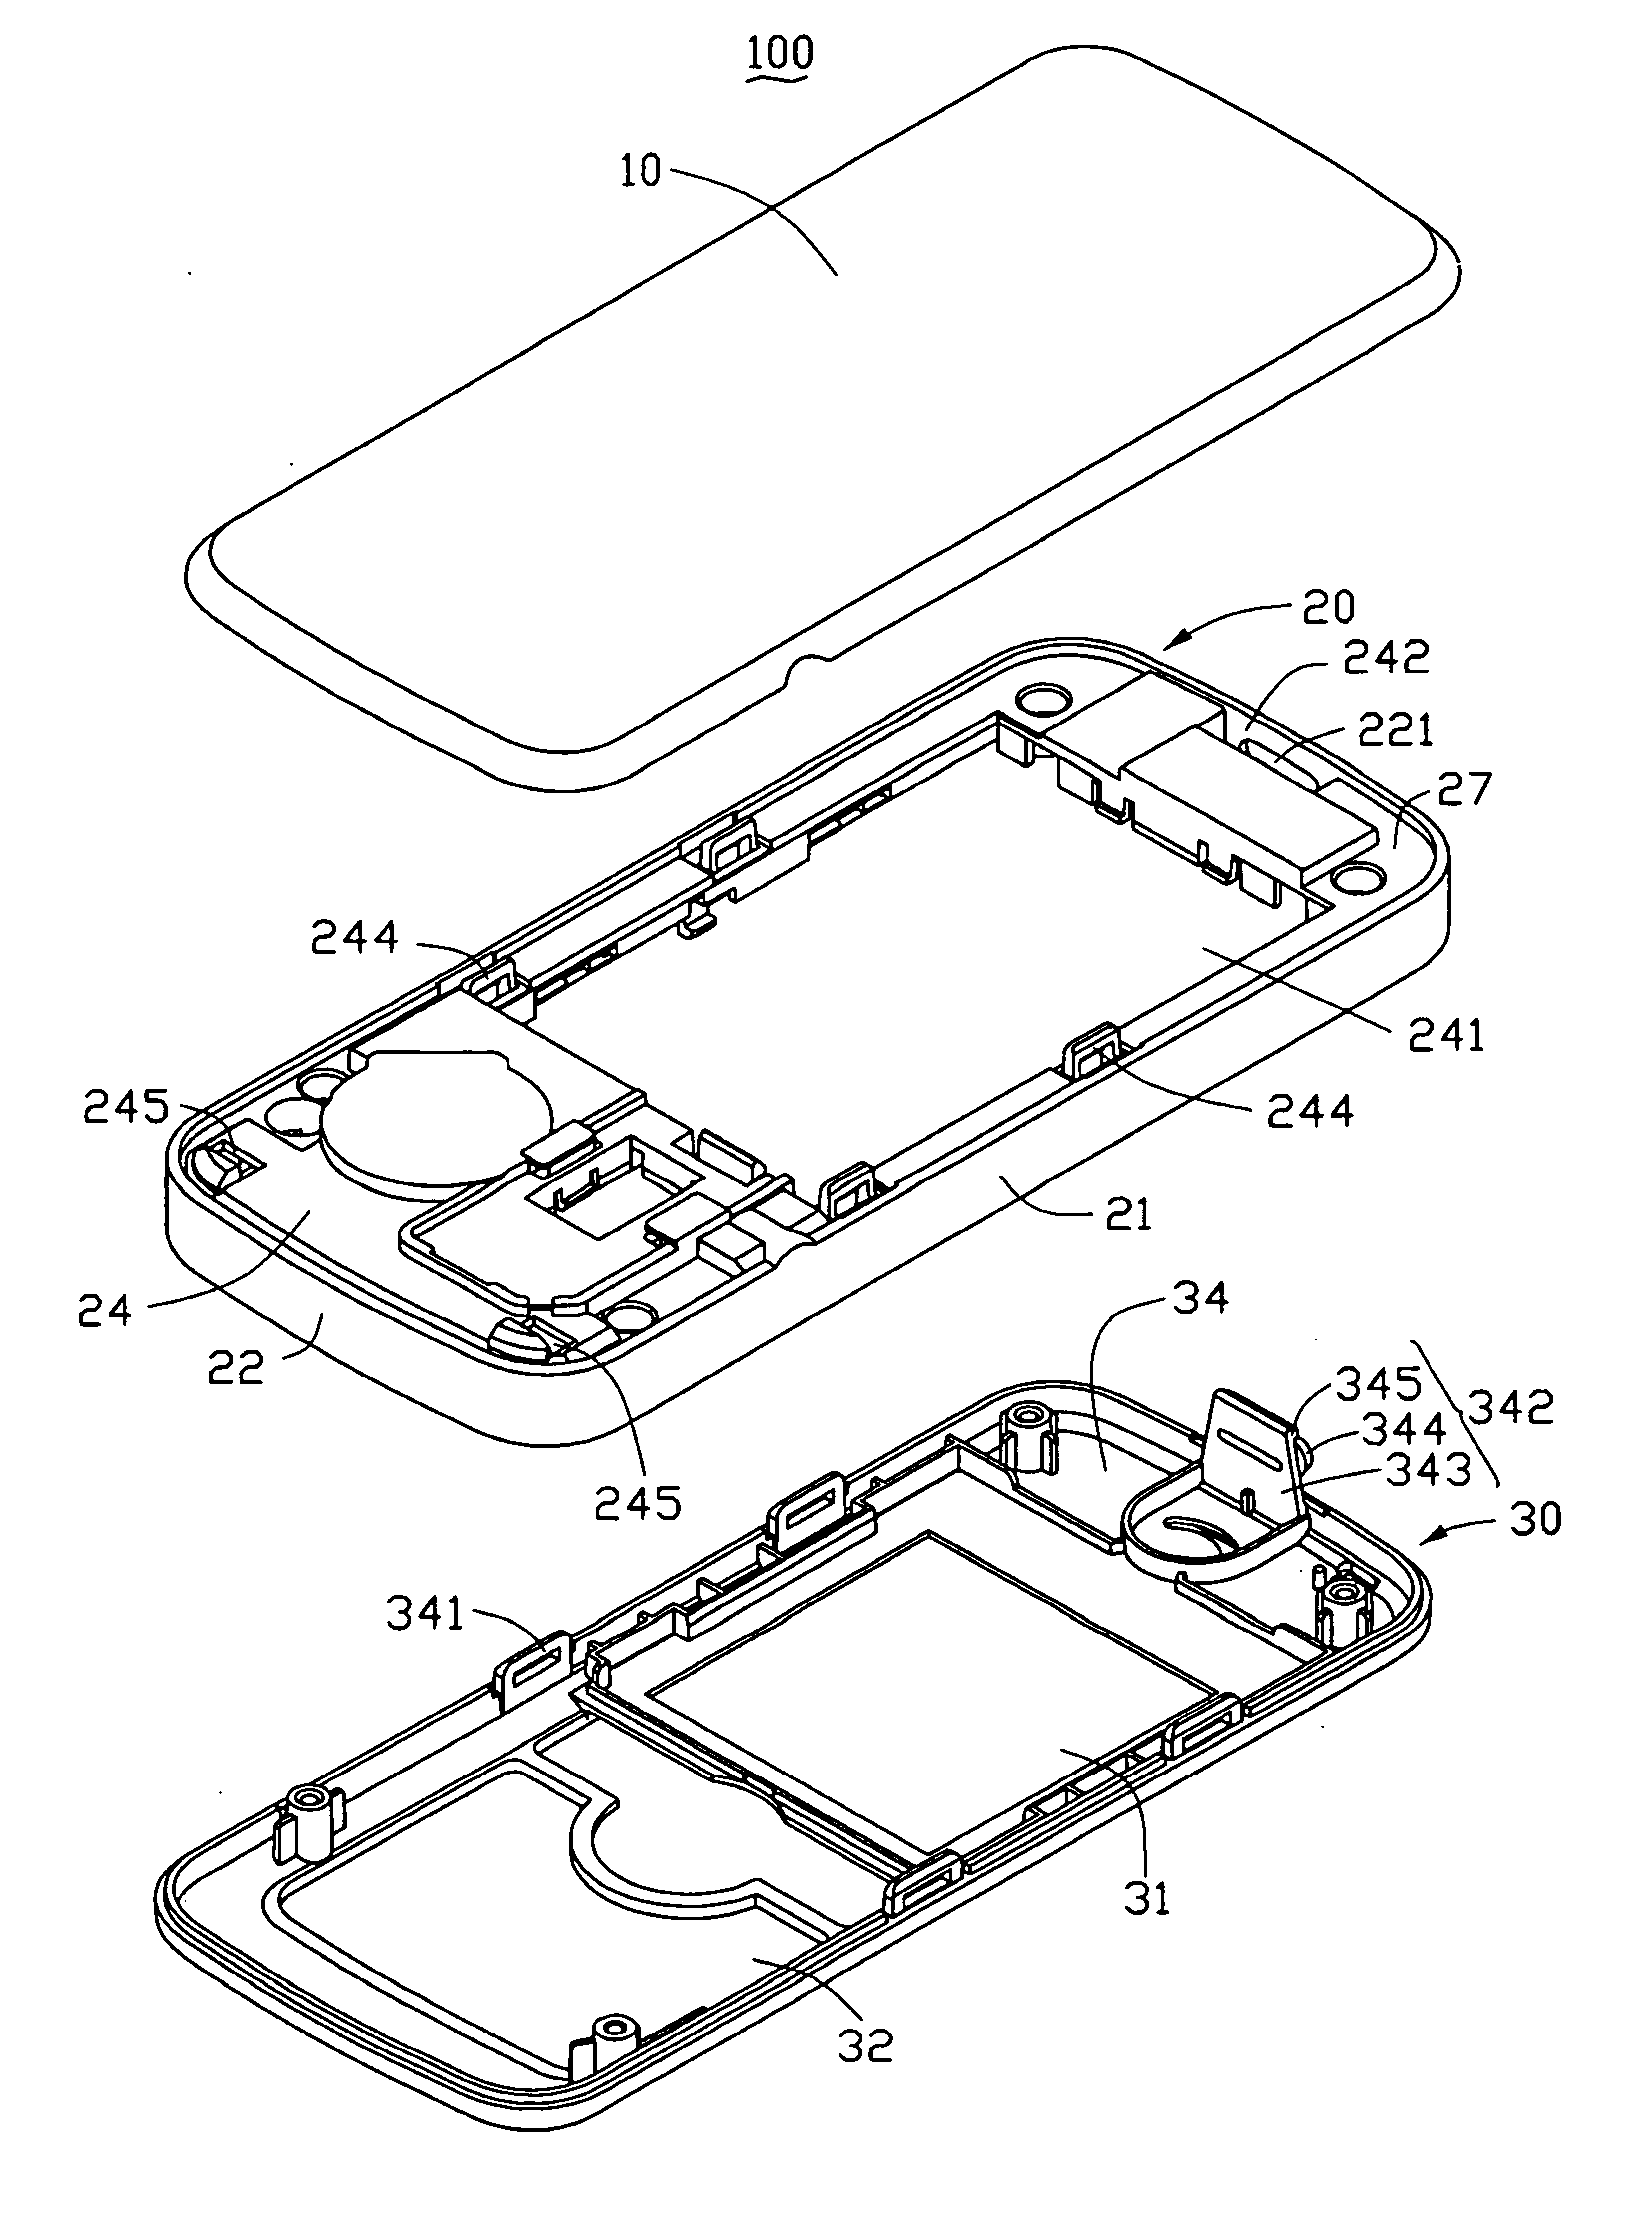 Battery cover latching assembly for portable electronic device